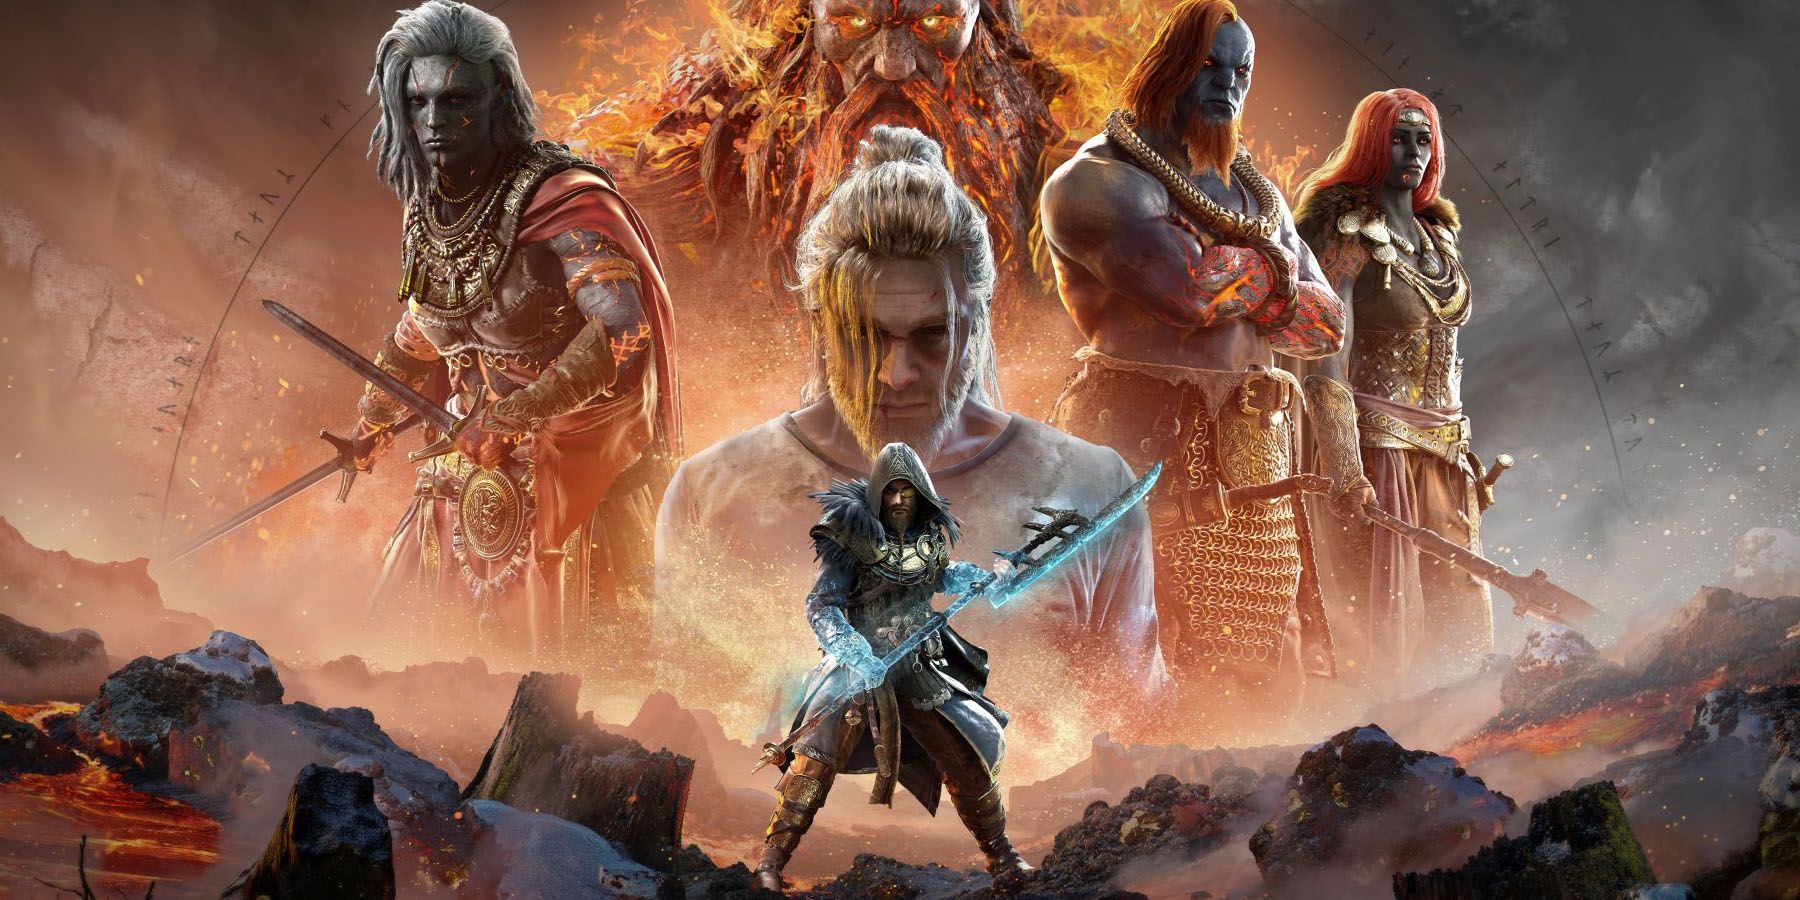 A promotional image of various characters from Assassin's Creed Valhalla's Dawn of Ragnarok DLC.